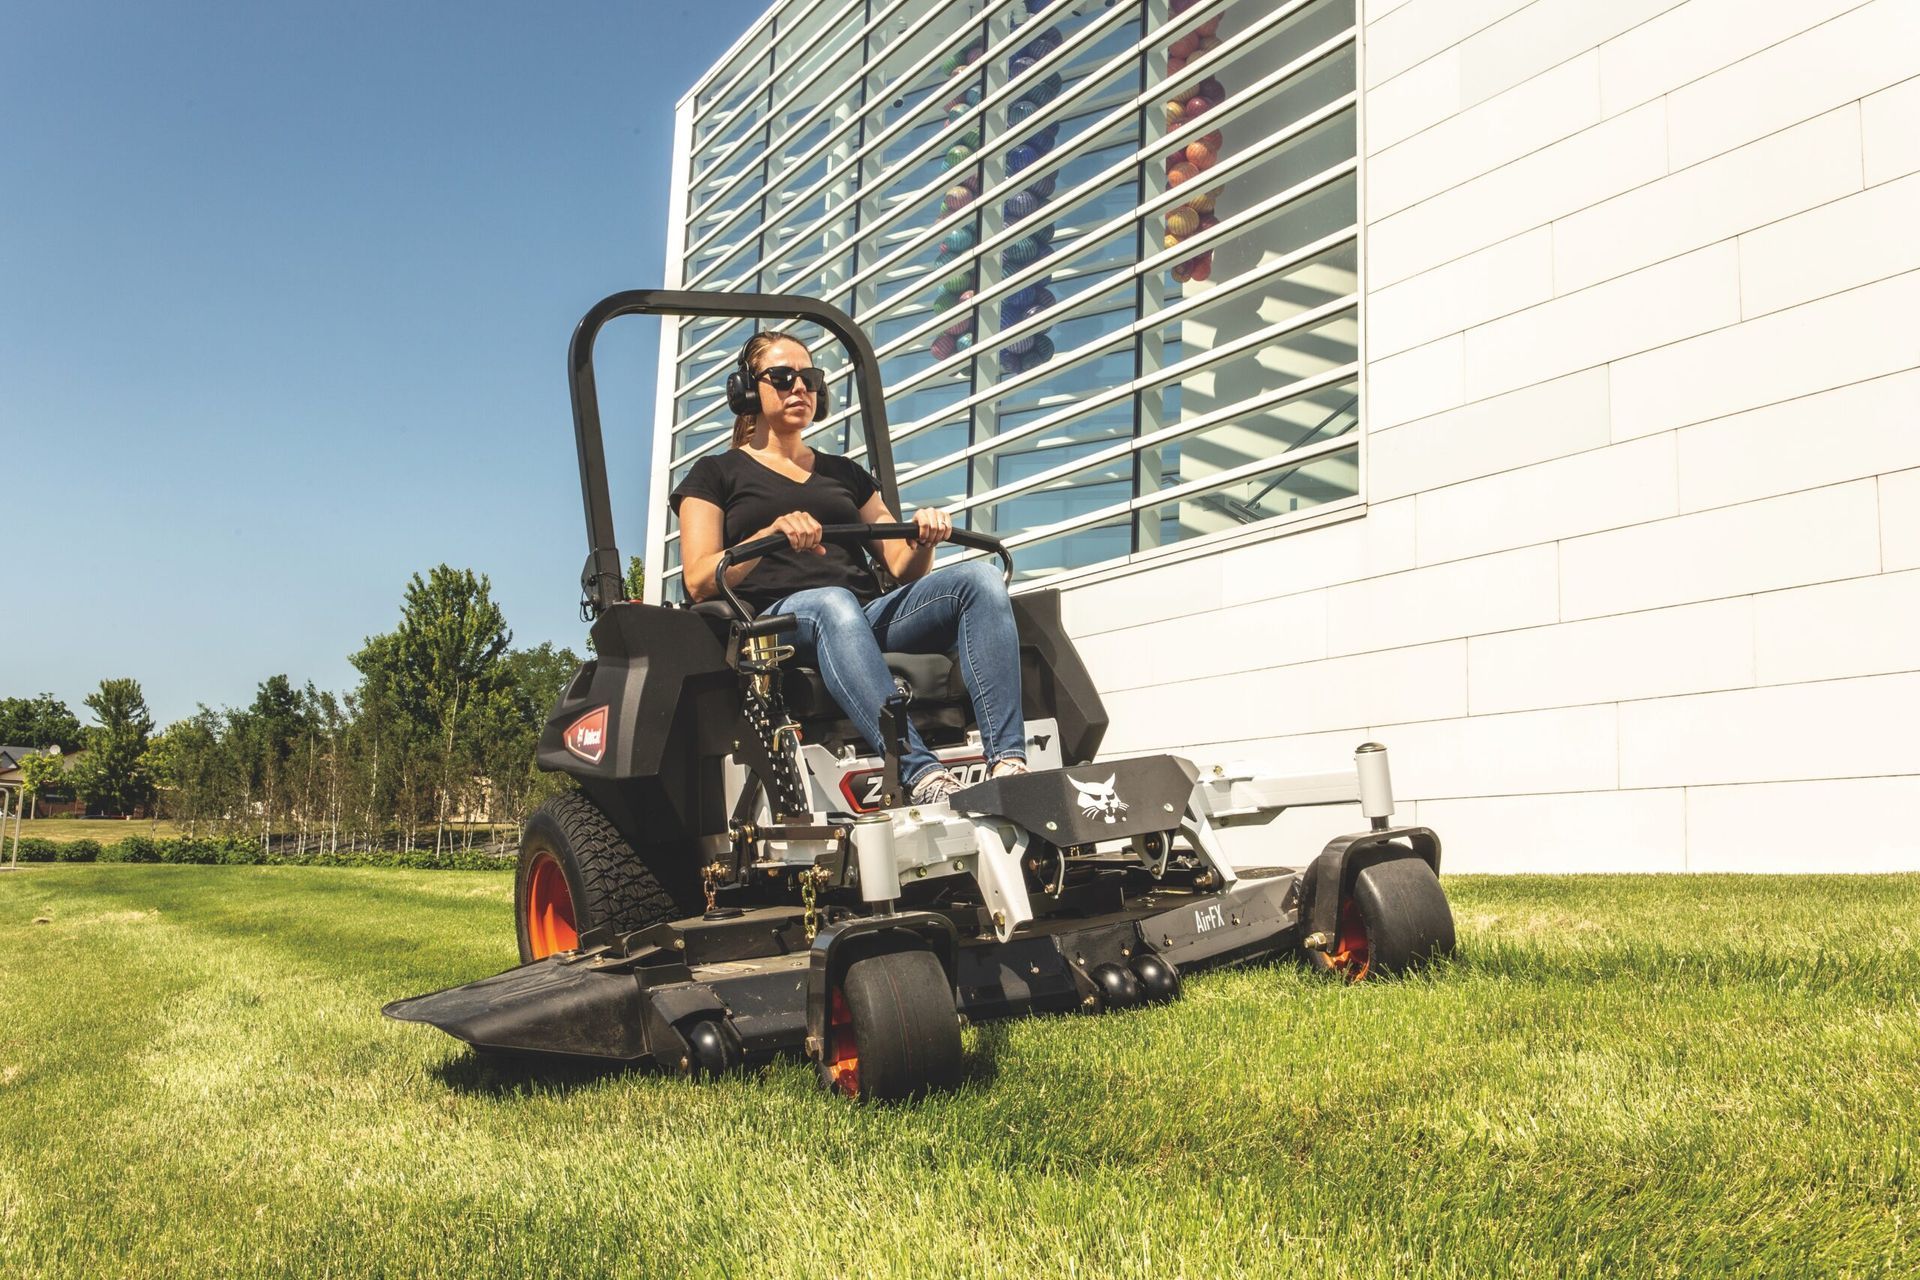 A woman is sitting on a lawn mower in front of a building.